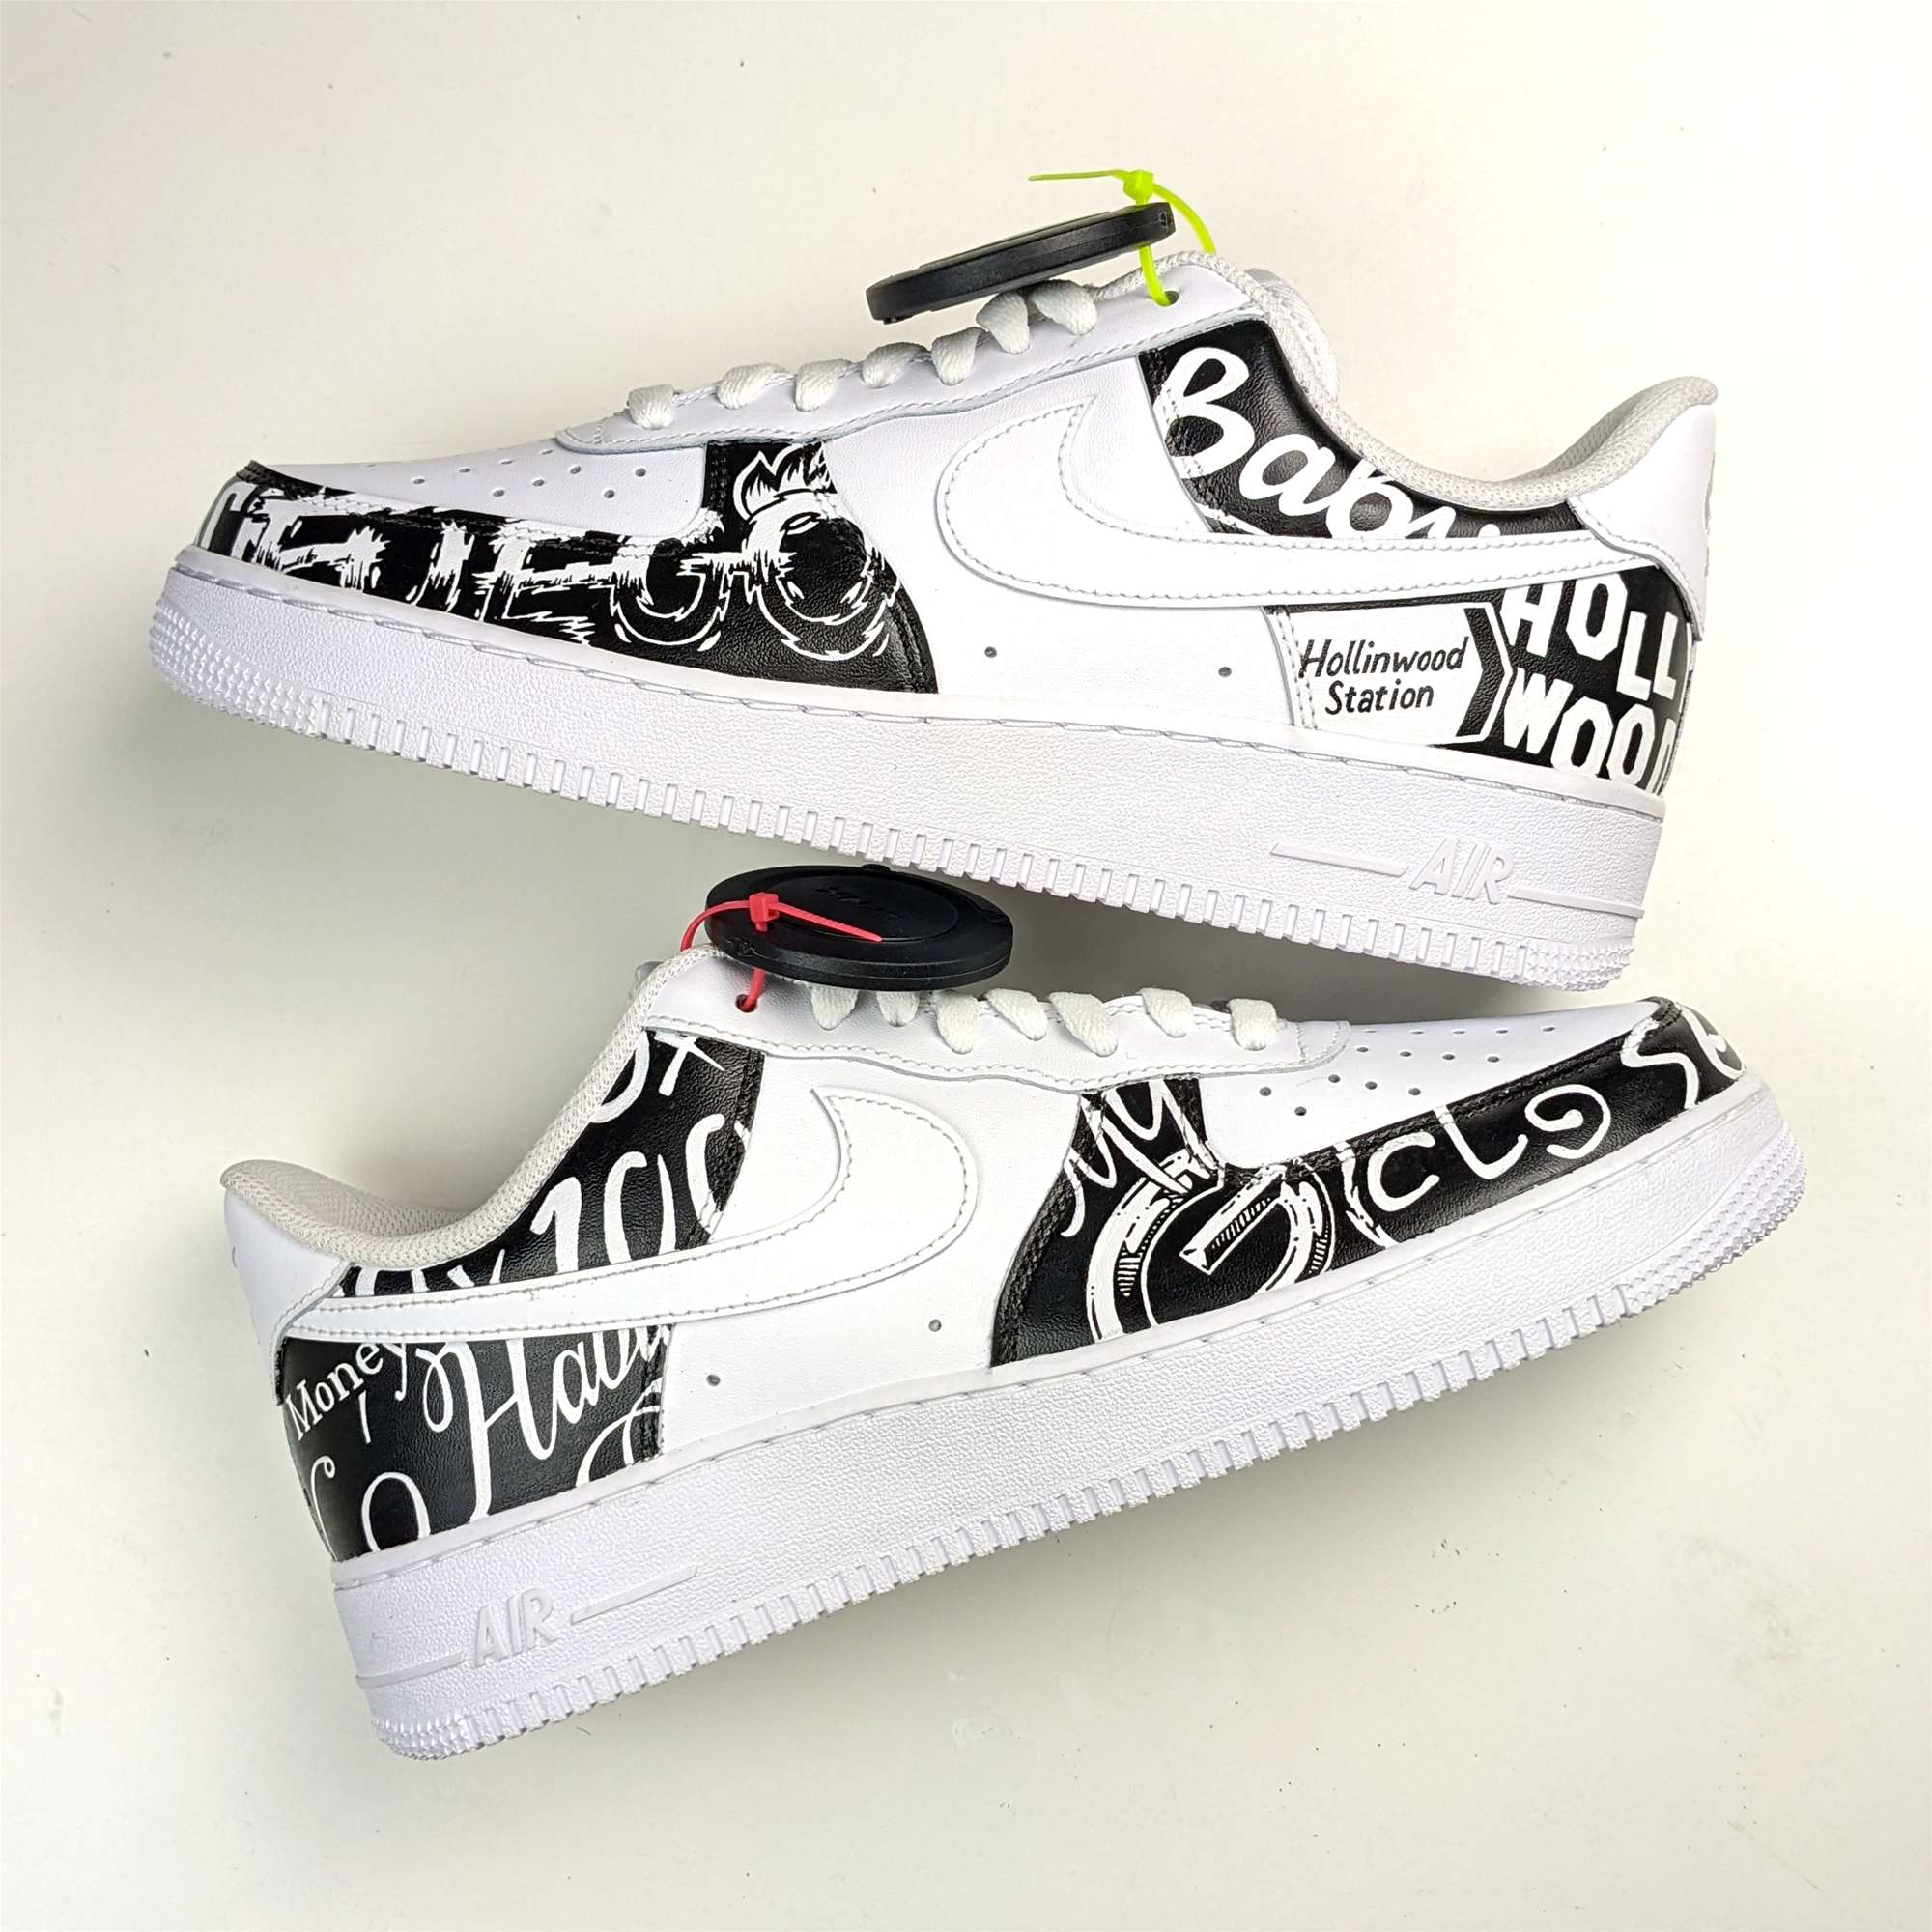 Mr Lee, Nike Air Force 01 limited edition design for musician Aitch.